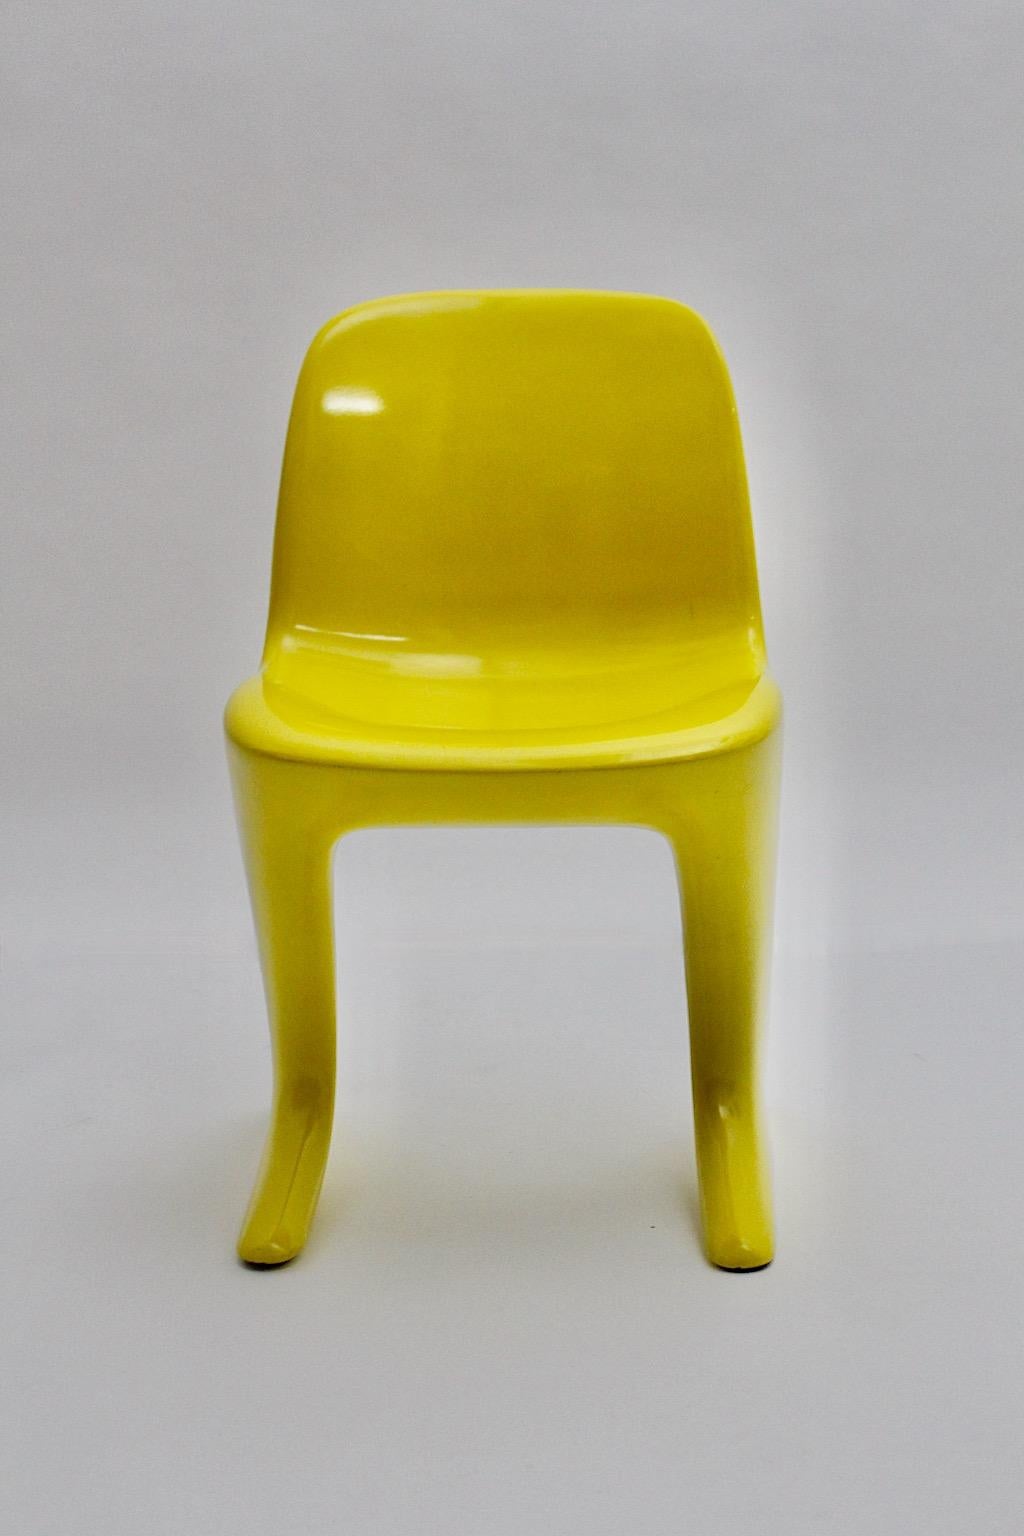 Space Age Vintage Yellow Plastic Chair Kangaroo Chair Ernst Moeckl 1960s Germany For Sale 6